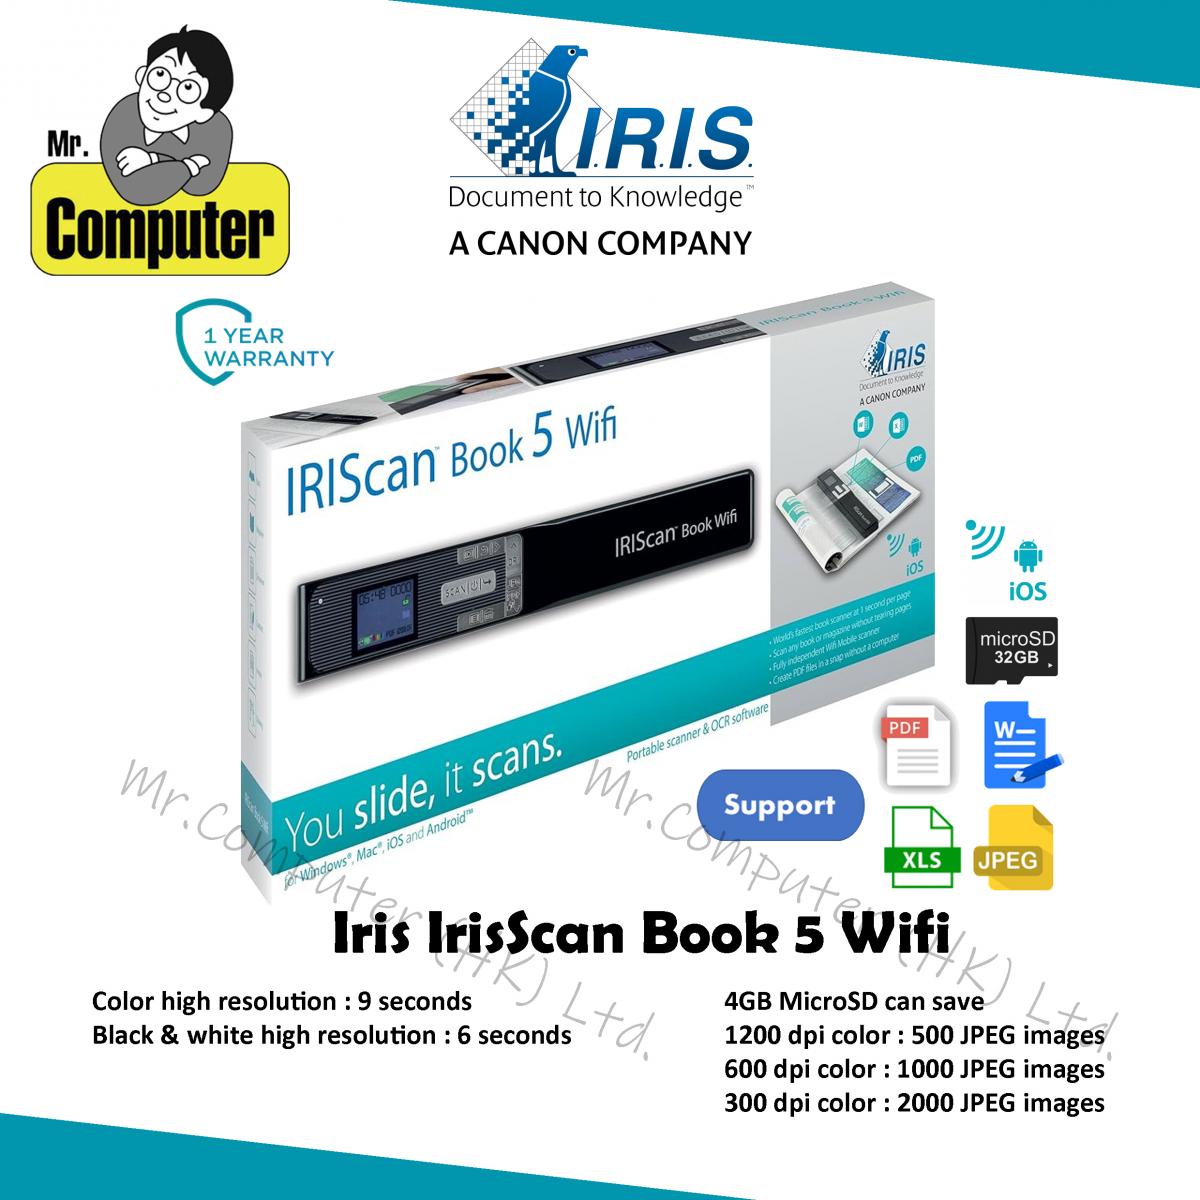 I.R.I.S. IRIScan Book 5 Wi-Fi Portable Scanner Specifications and